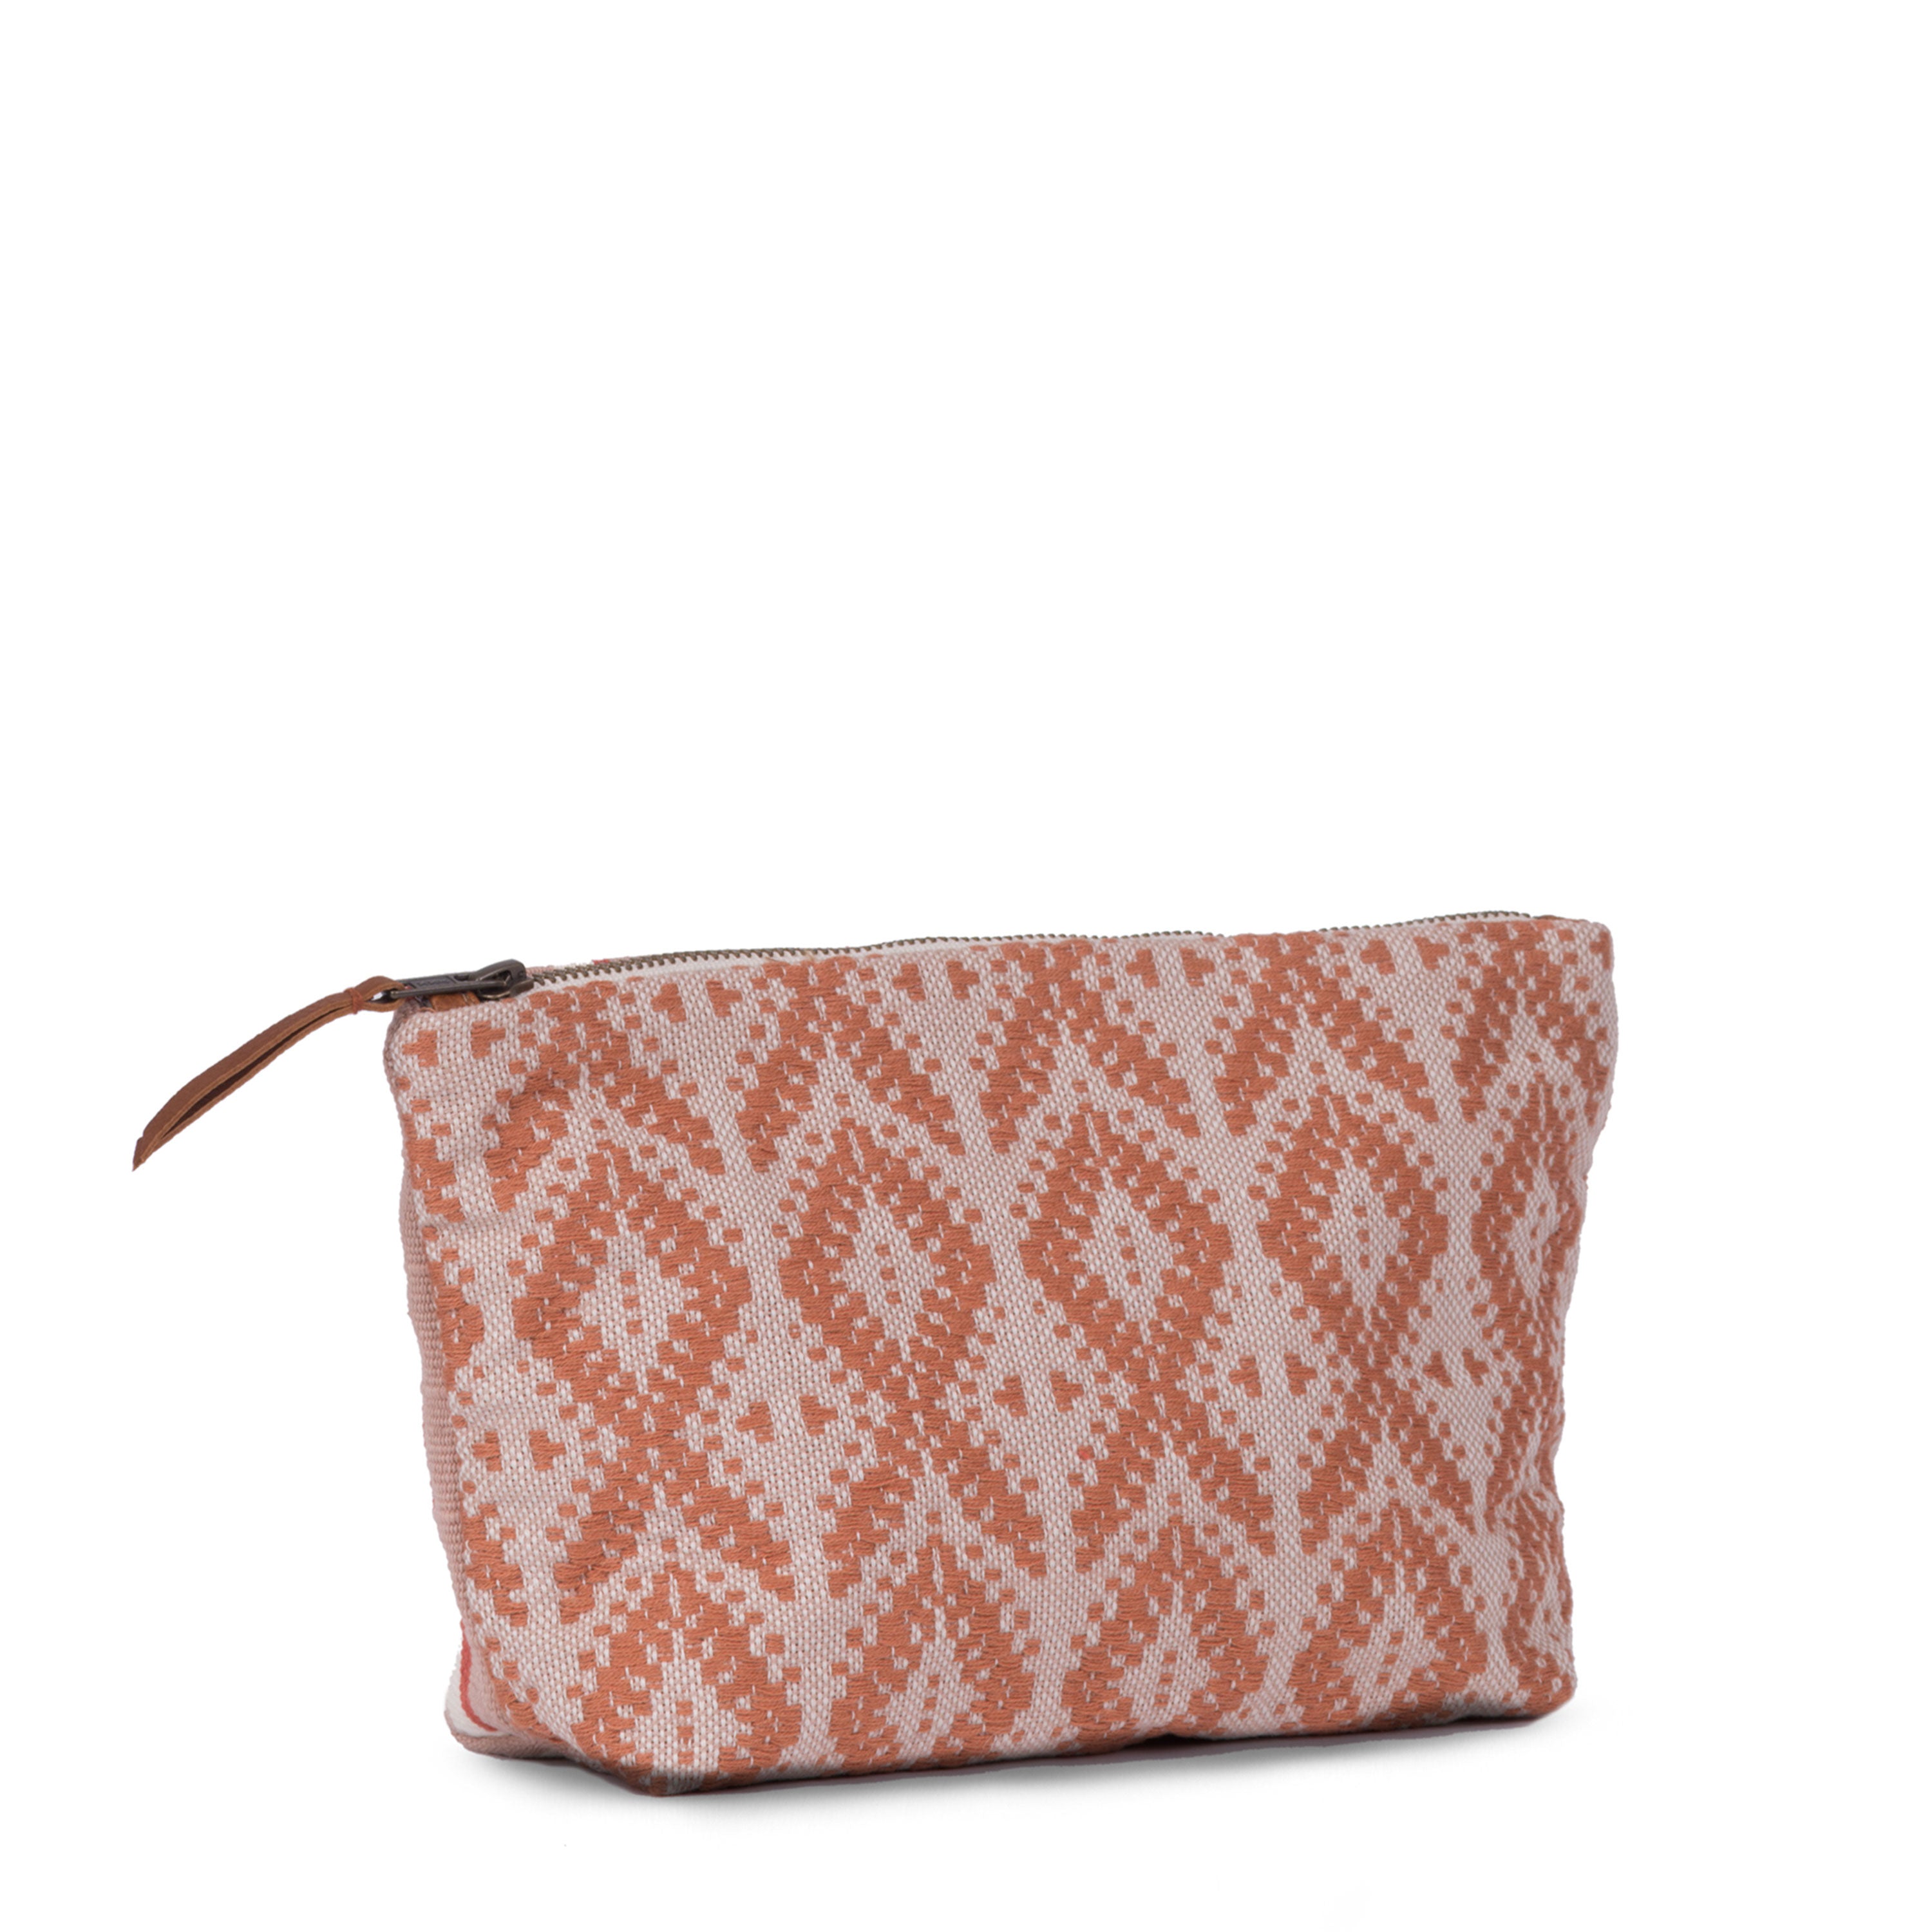 Hand woven Cristina Cosmetic Pouch - Ethical Shopping at Mercado Global